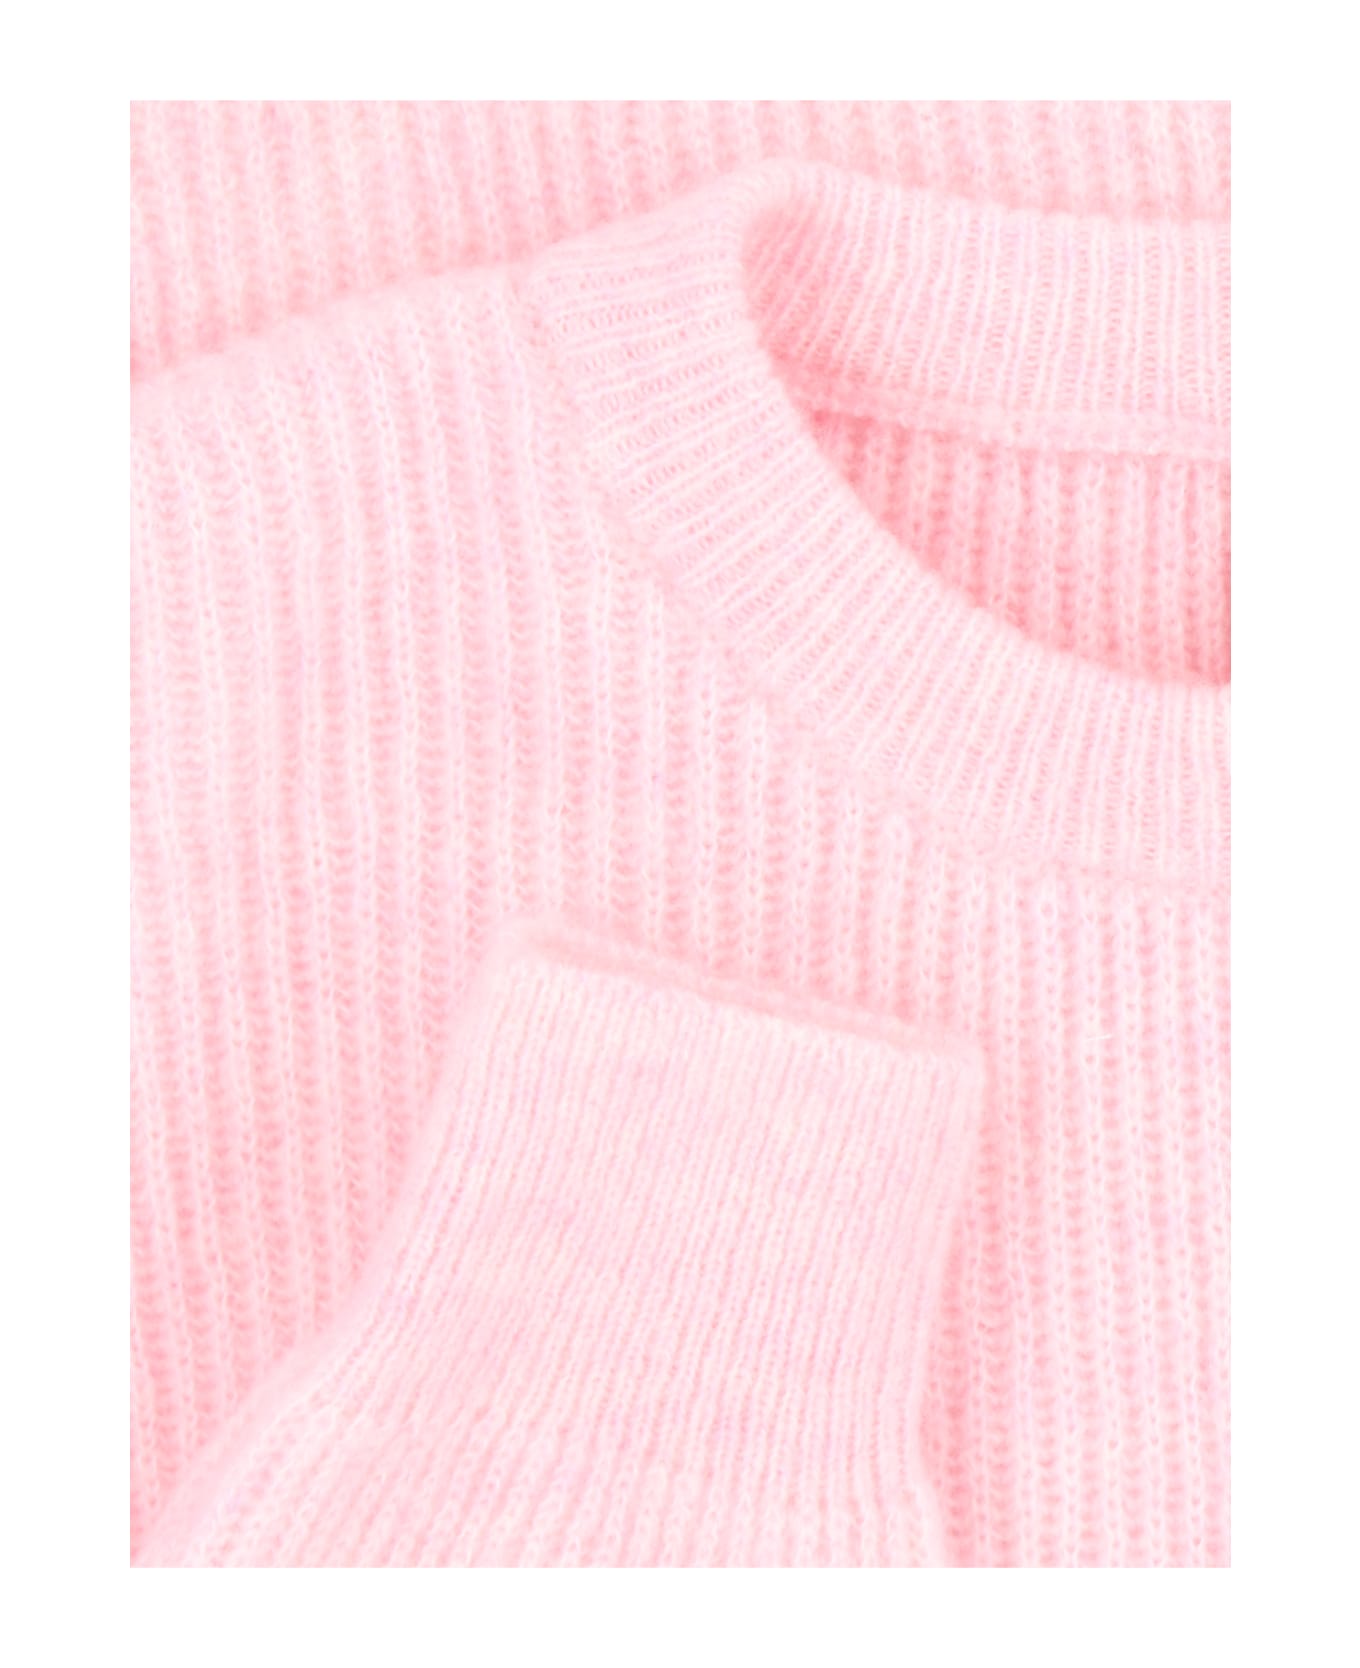 Sunflower Ribbed Sweater - Pink